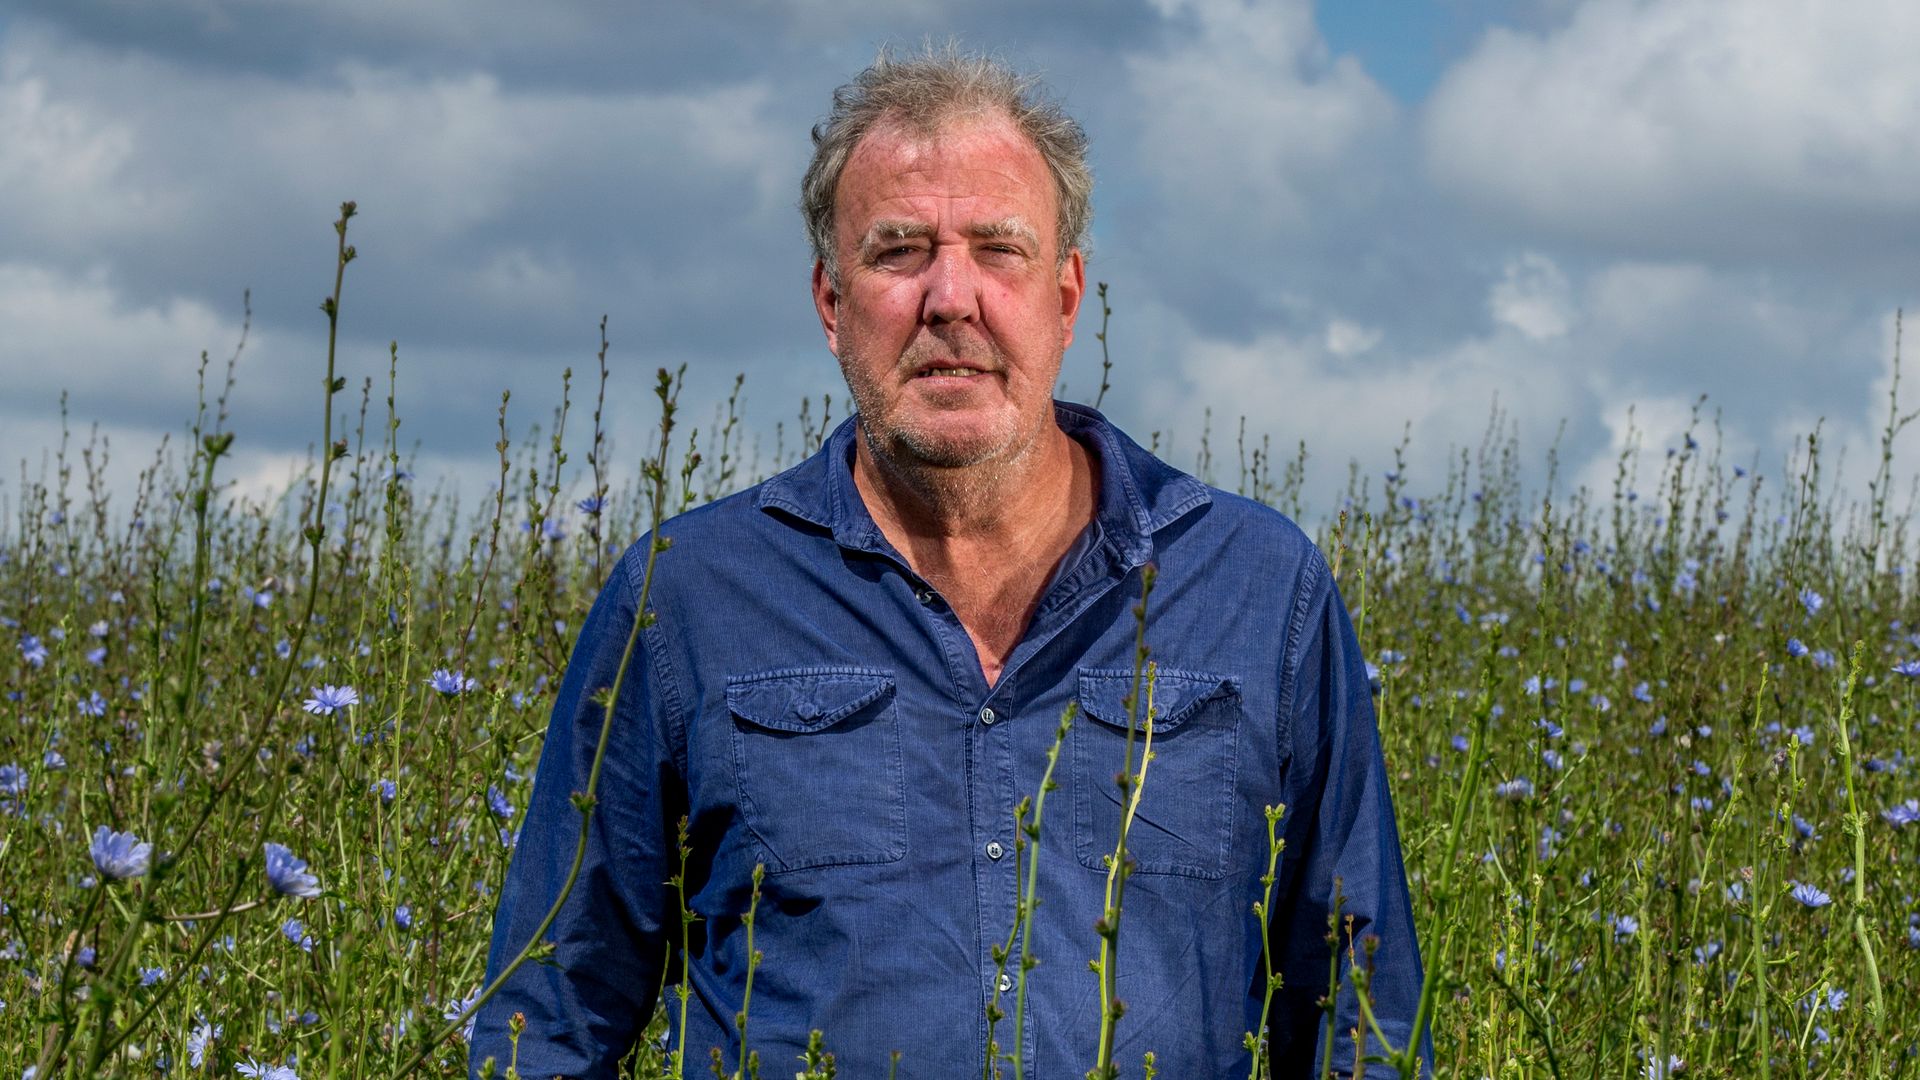 Jeremy Clarkson, presenter and journalist, pictured at his farm 'Diddly Squat' in Oxfordshire, August 12, 2021.   (